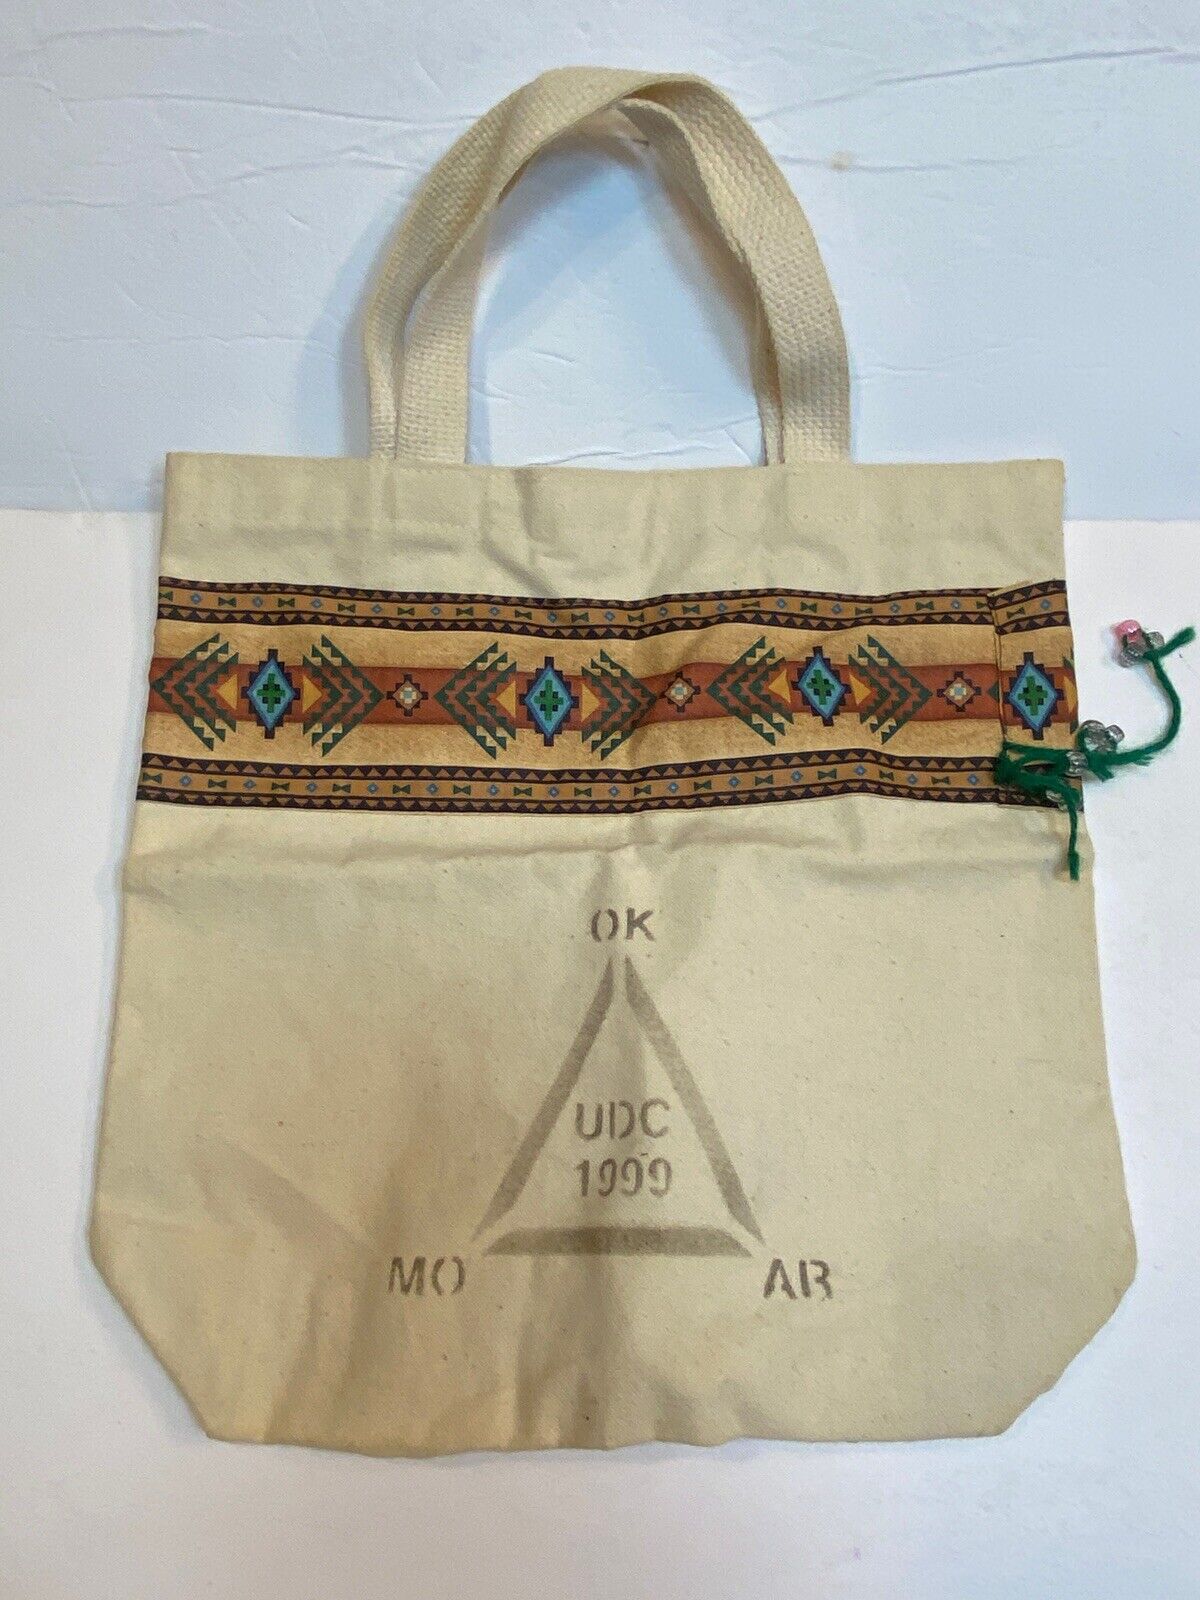 UDC United Daughters of the Confederacy Convention Bag 1999 Oklahoma Arkansas MO